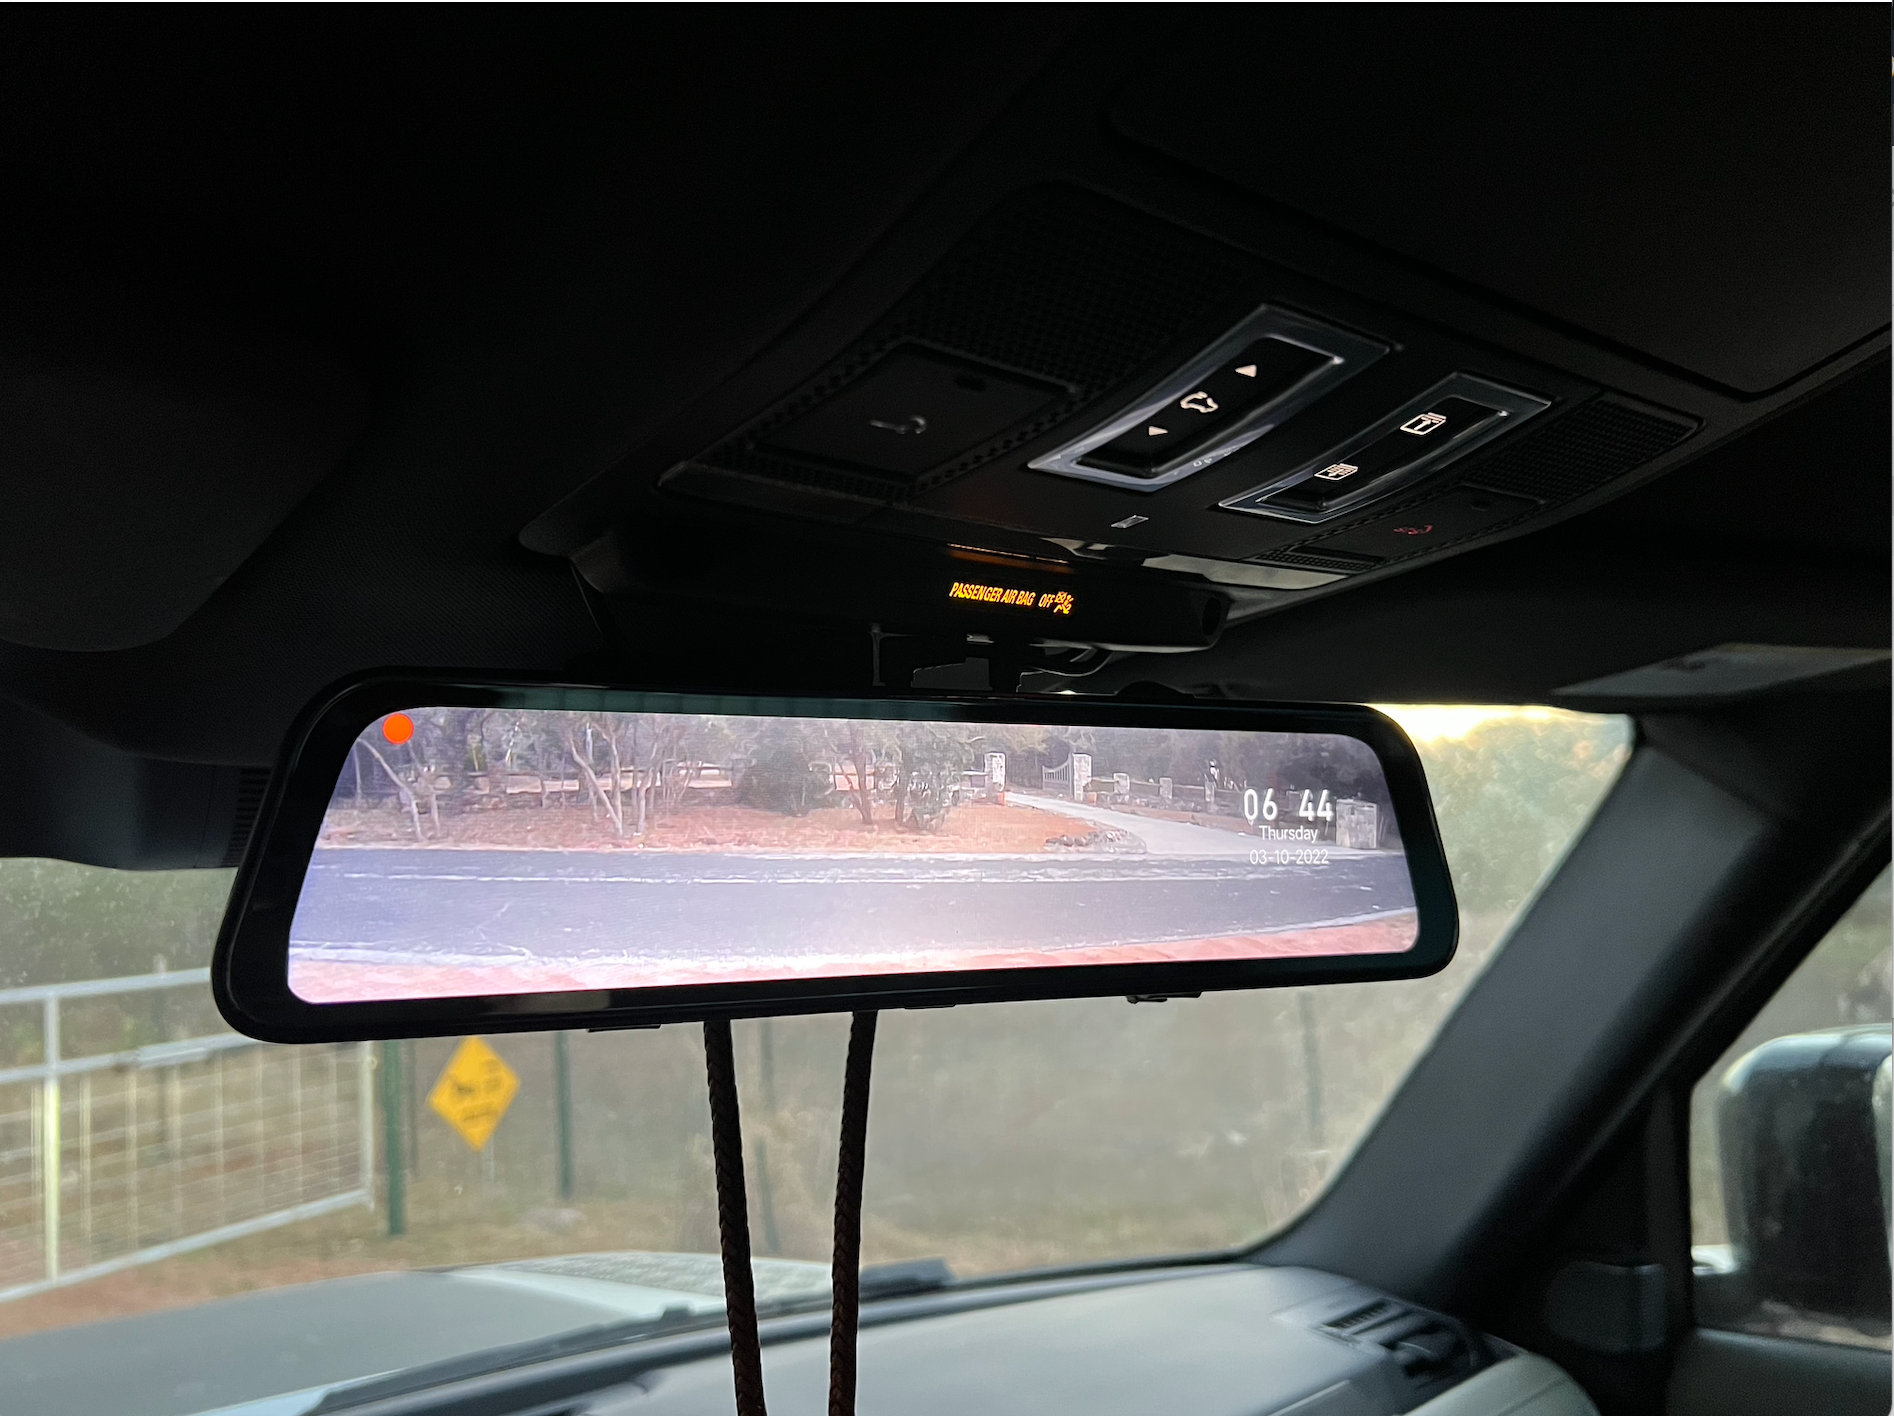 Redneck Install of ClearSight Mirror - Land Rover Forums - Land